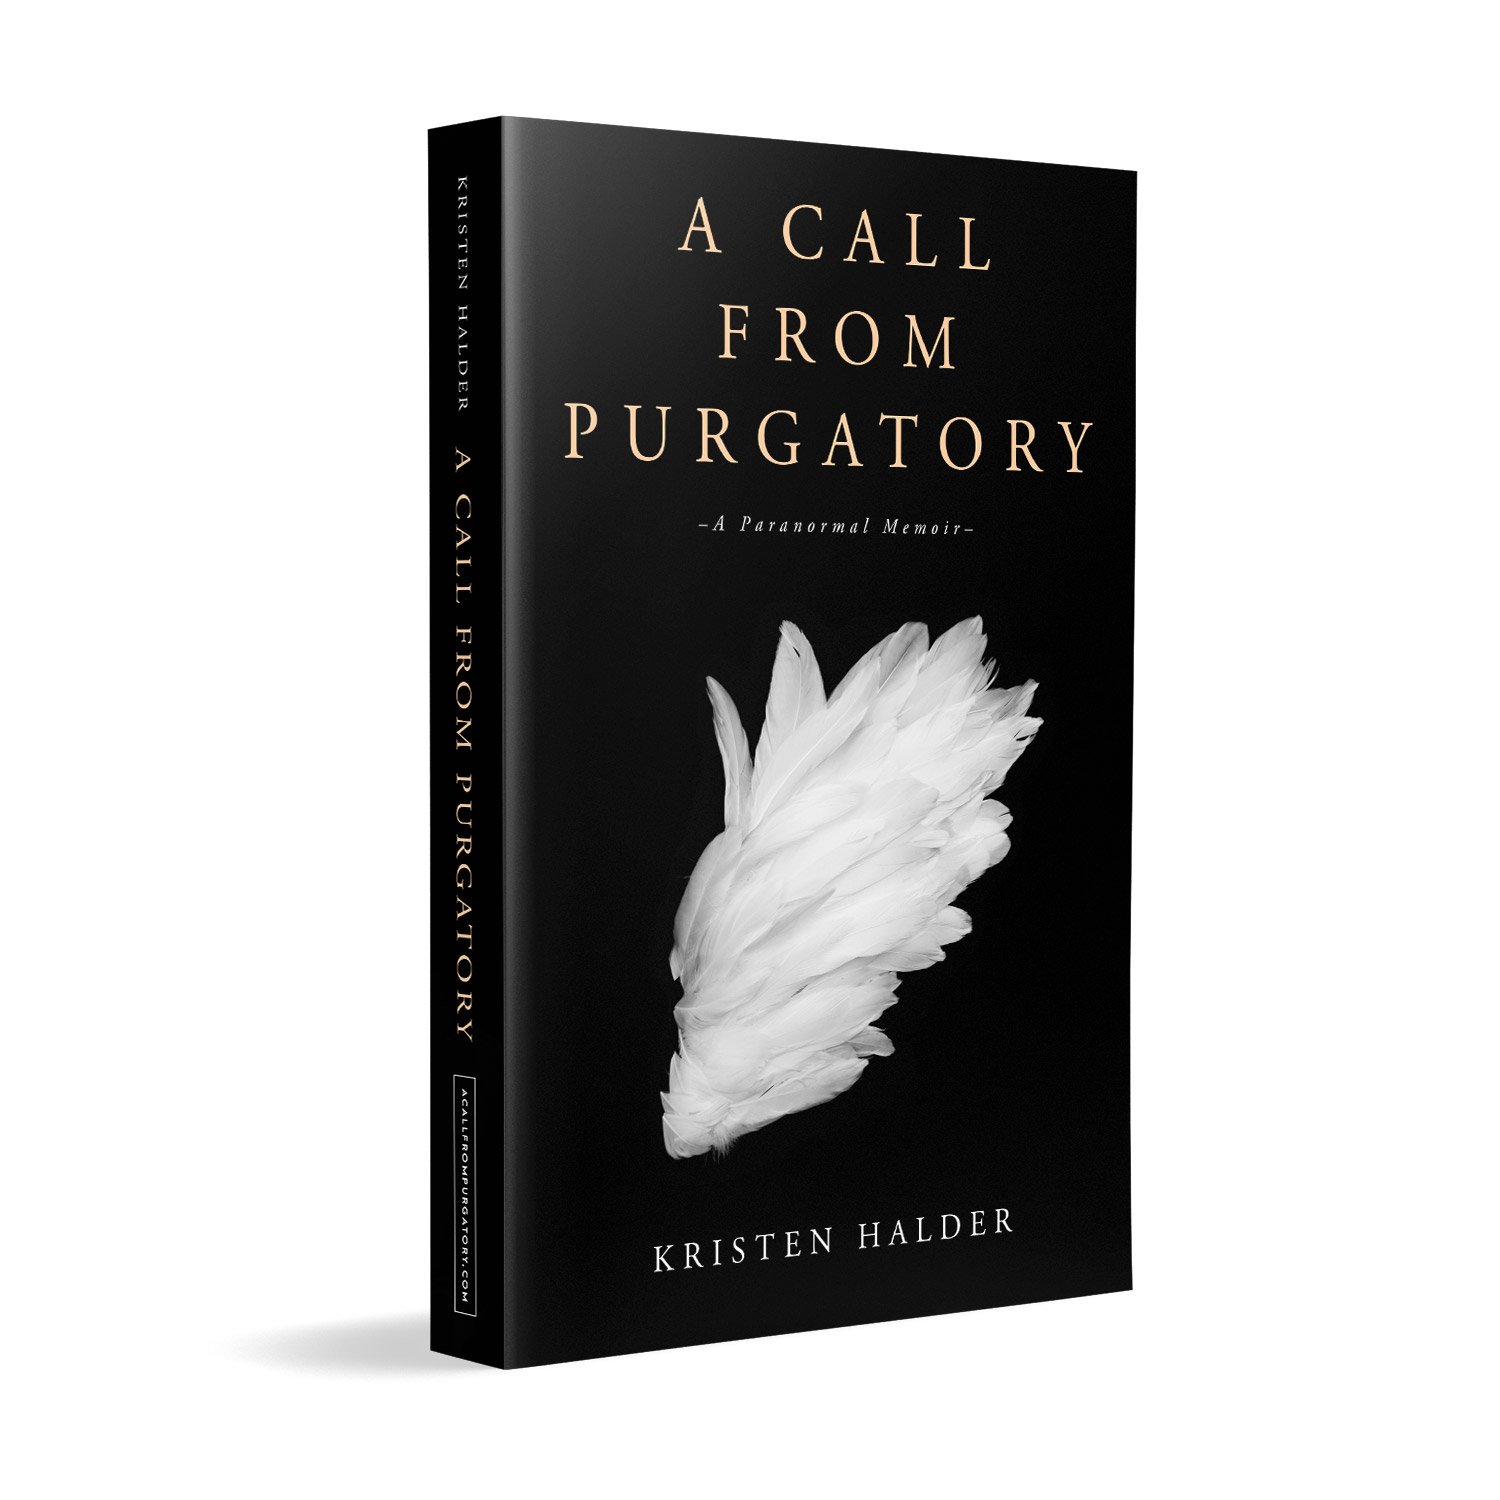 'A Call From Purgatory' is a chilling supernatural memoir. The author is Kristen Halder. The cover design & interior design of the series is by Mark Thomas. To learn more about what Mark could do for your book, please visit coverness.com